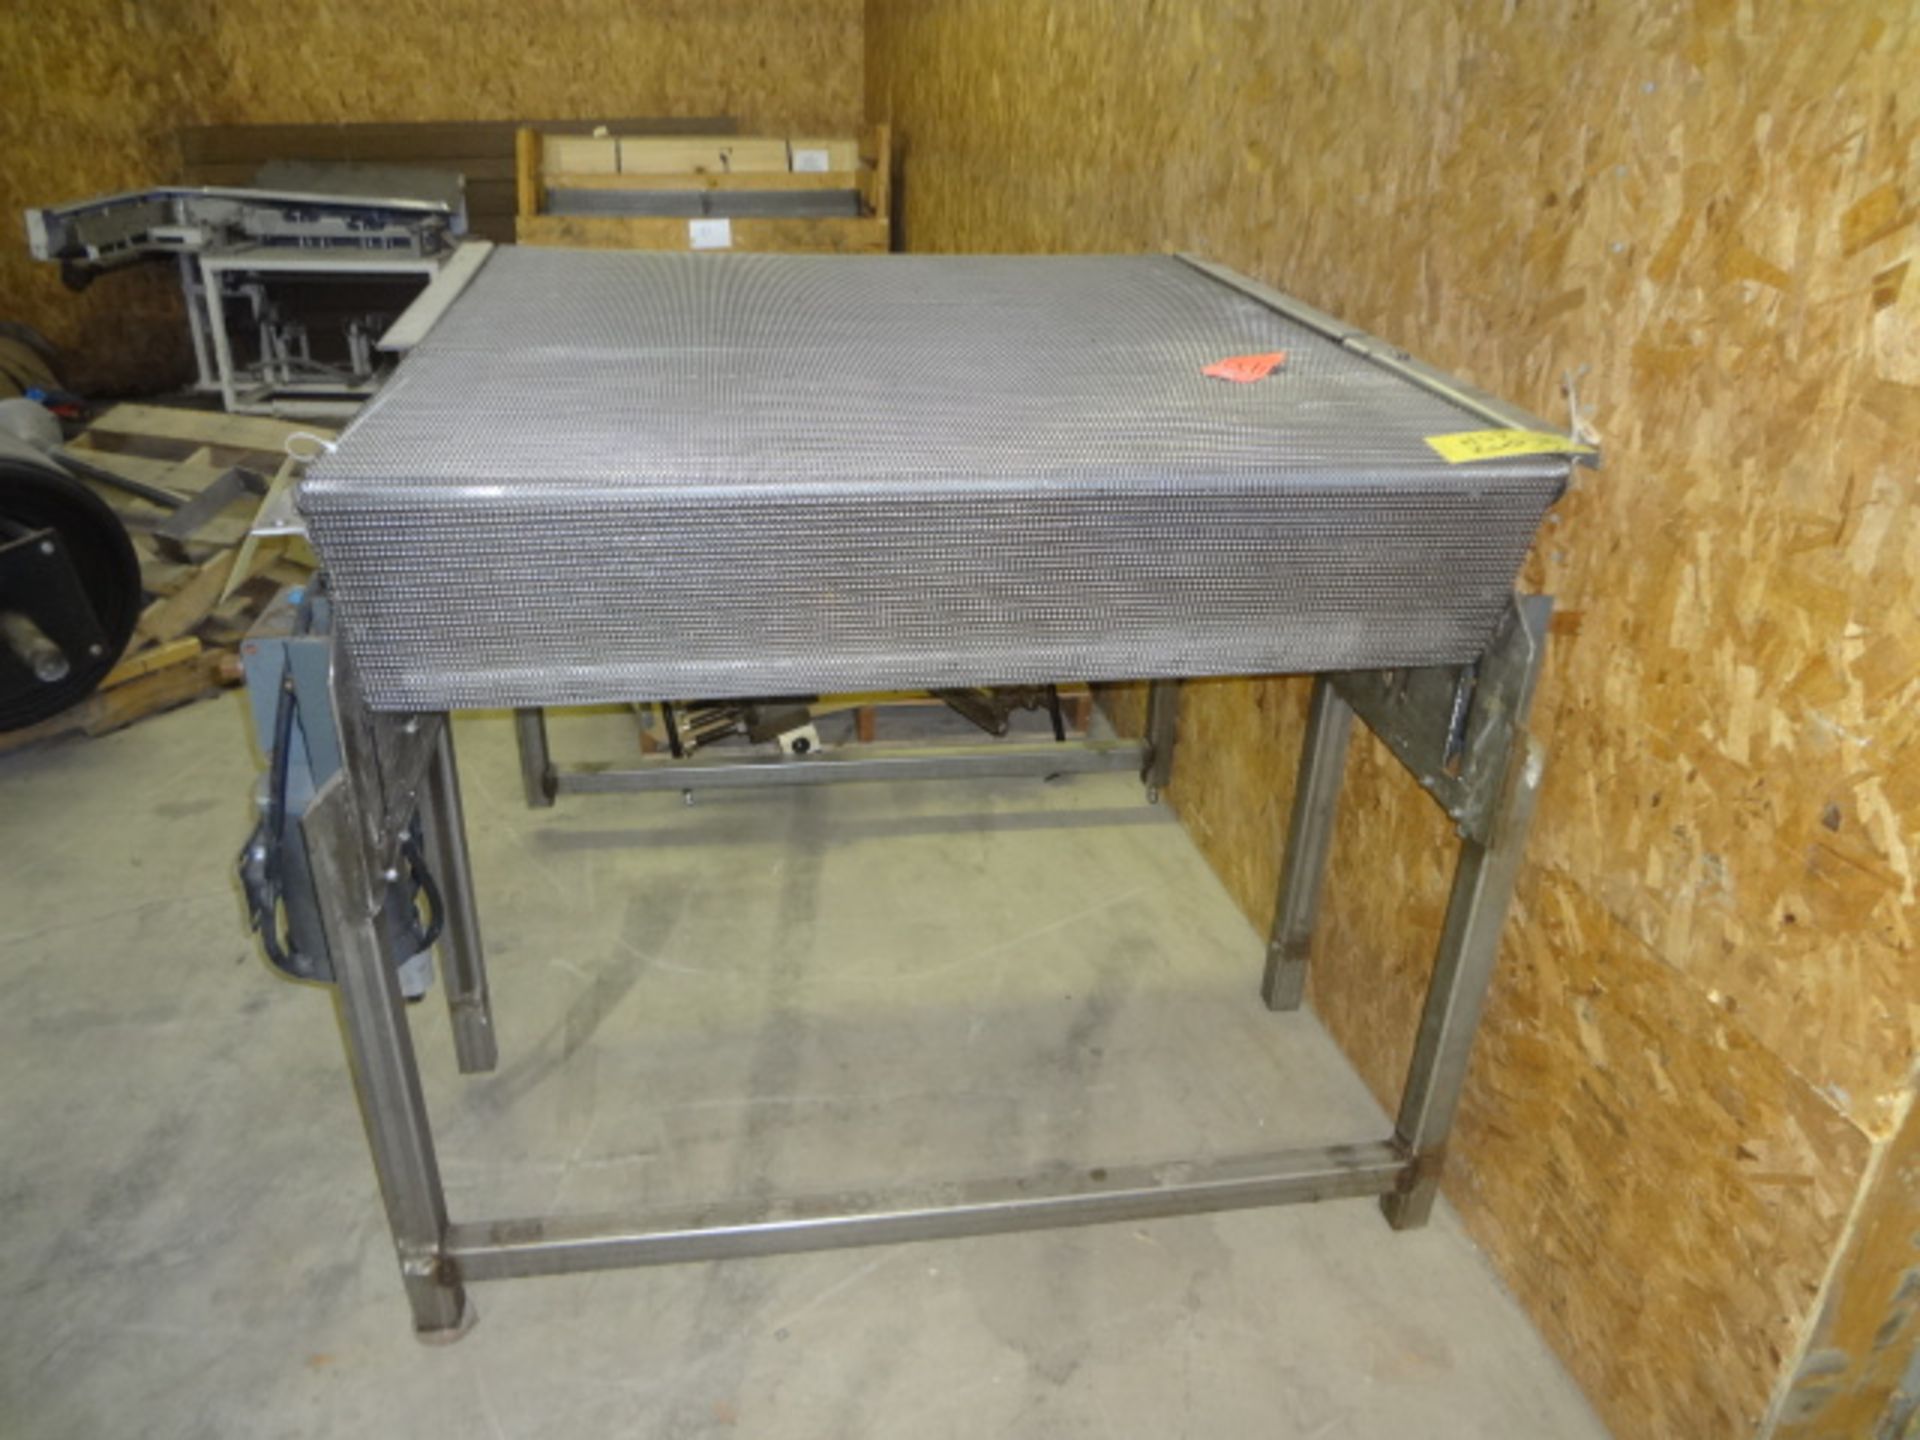 chain mesh conveyor 48” w x 60” l x 44” h w drive Rigging Fee for the item: $100